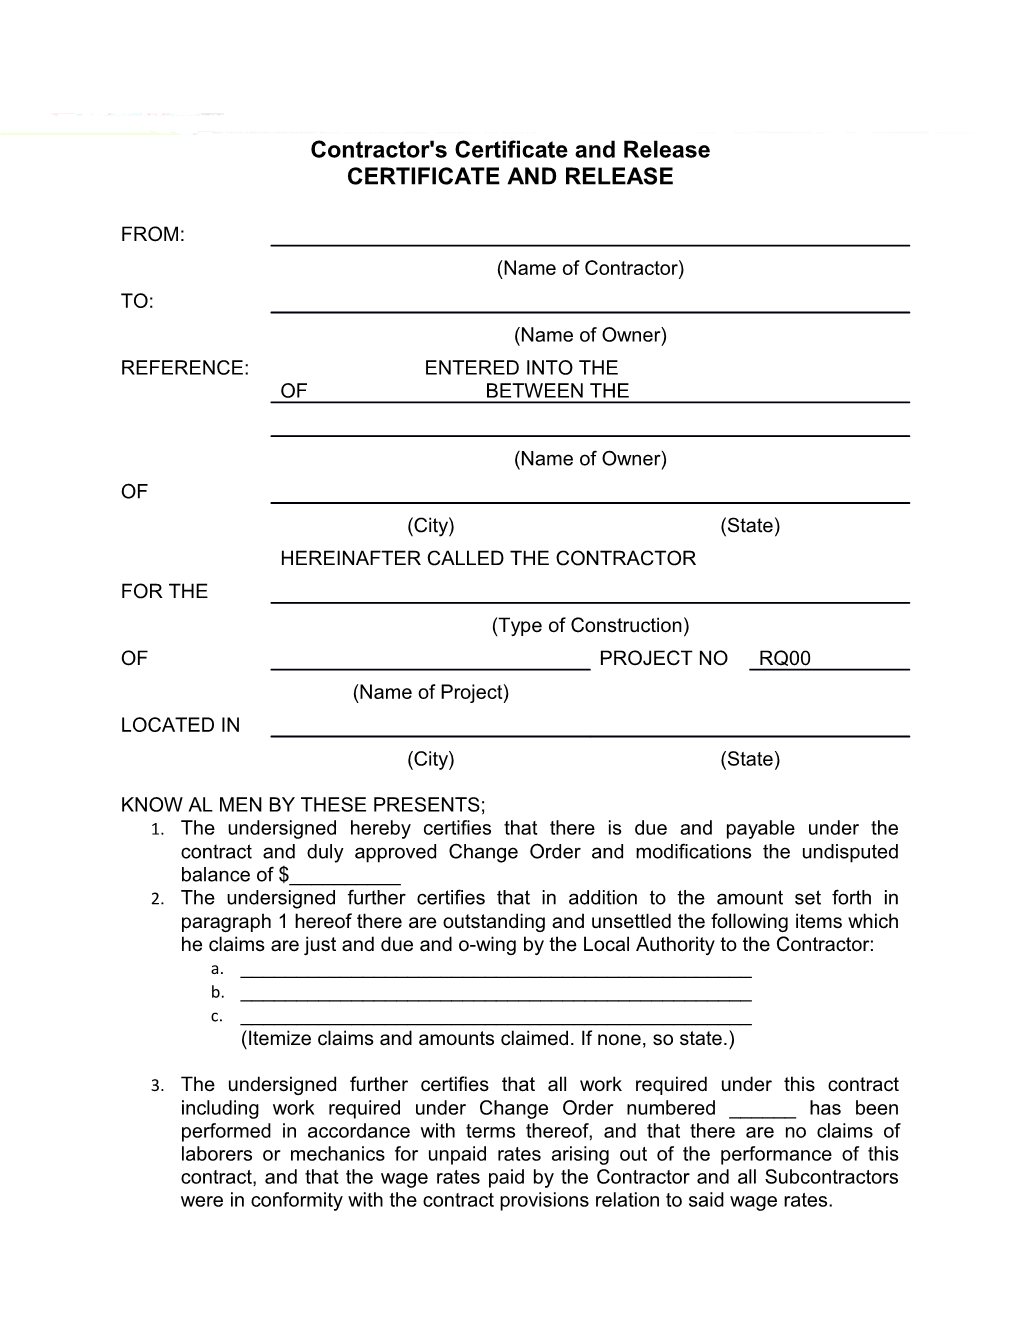 Contractor's Certificate and Release